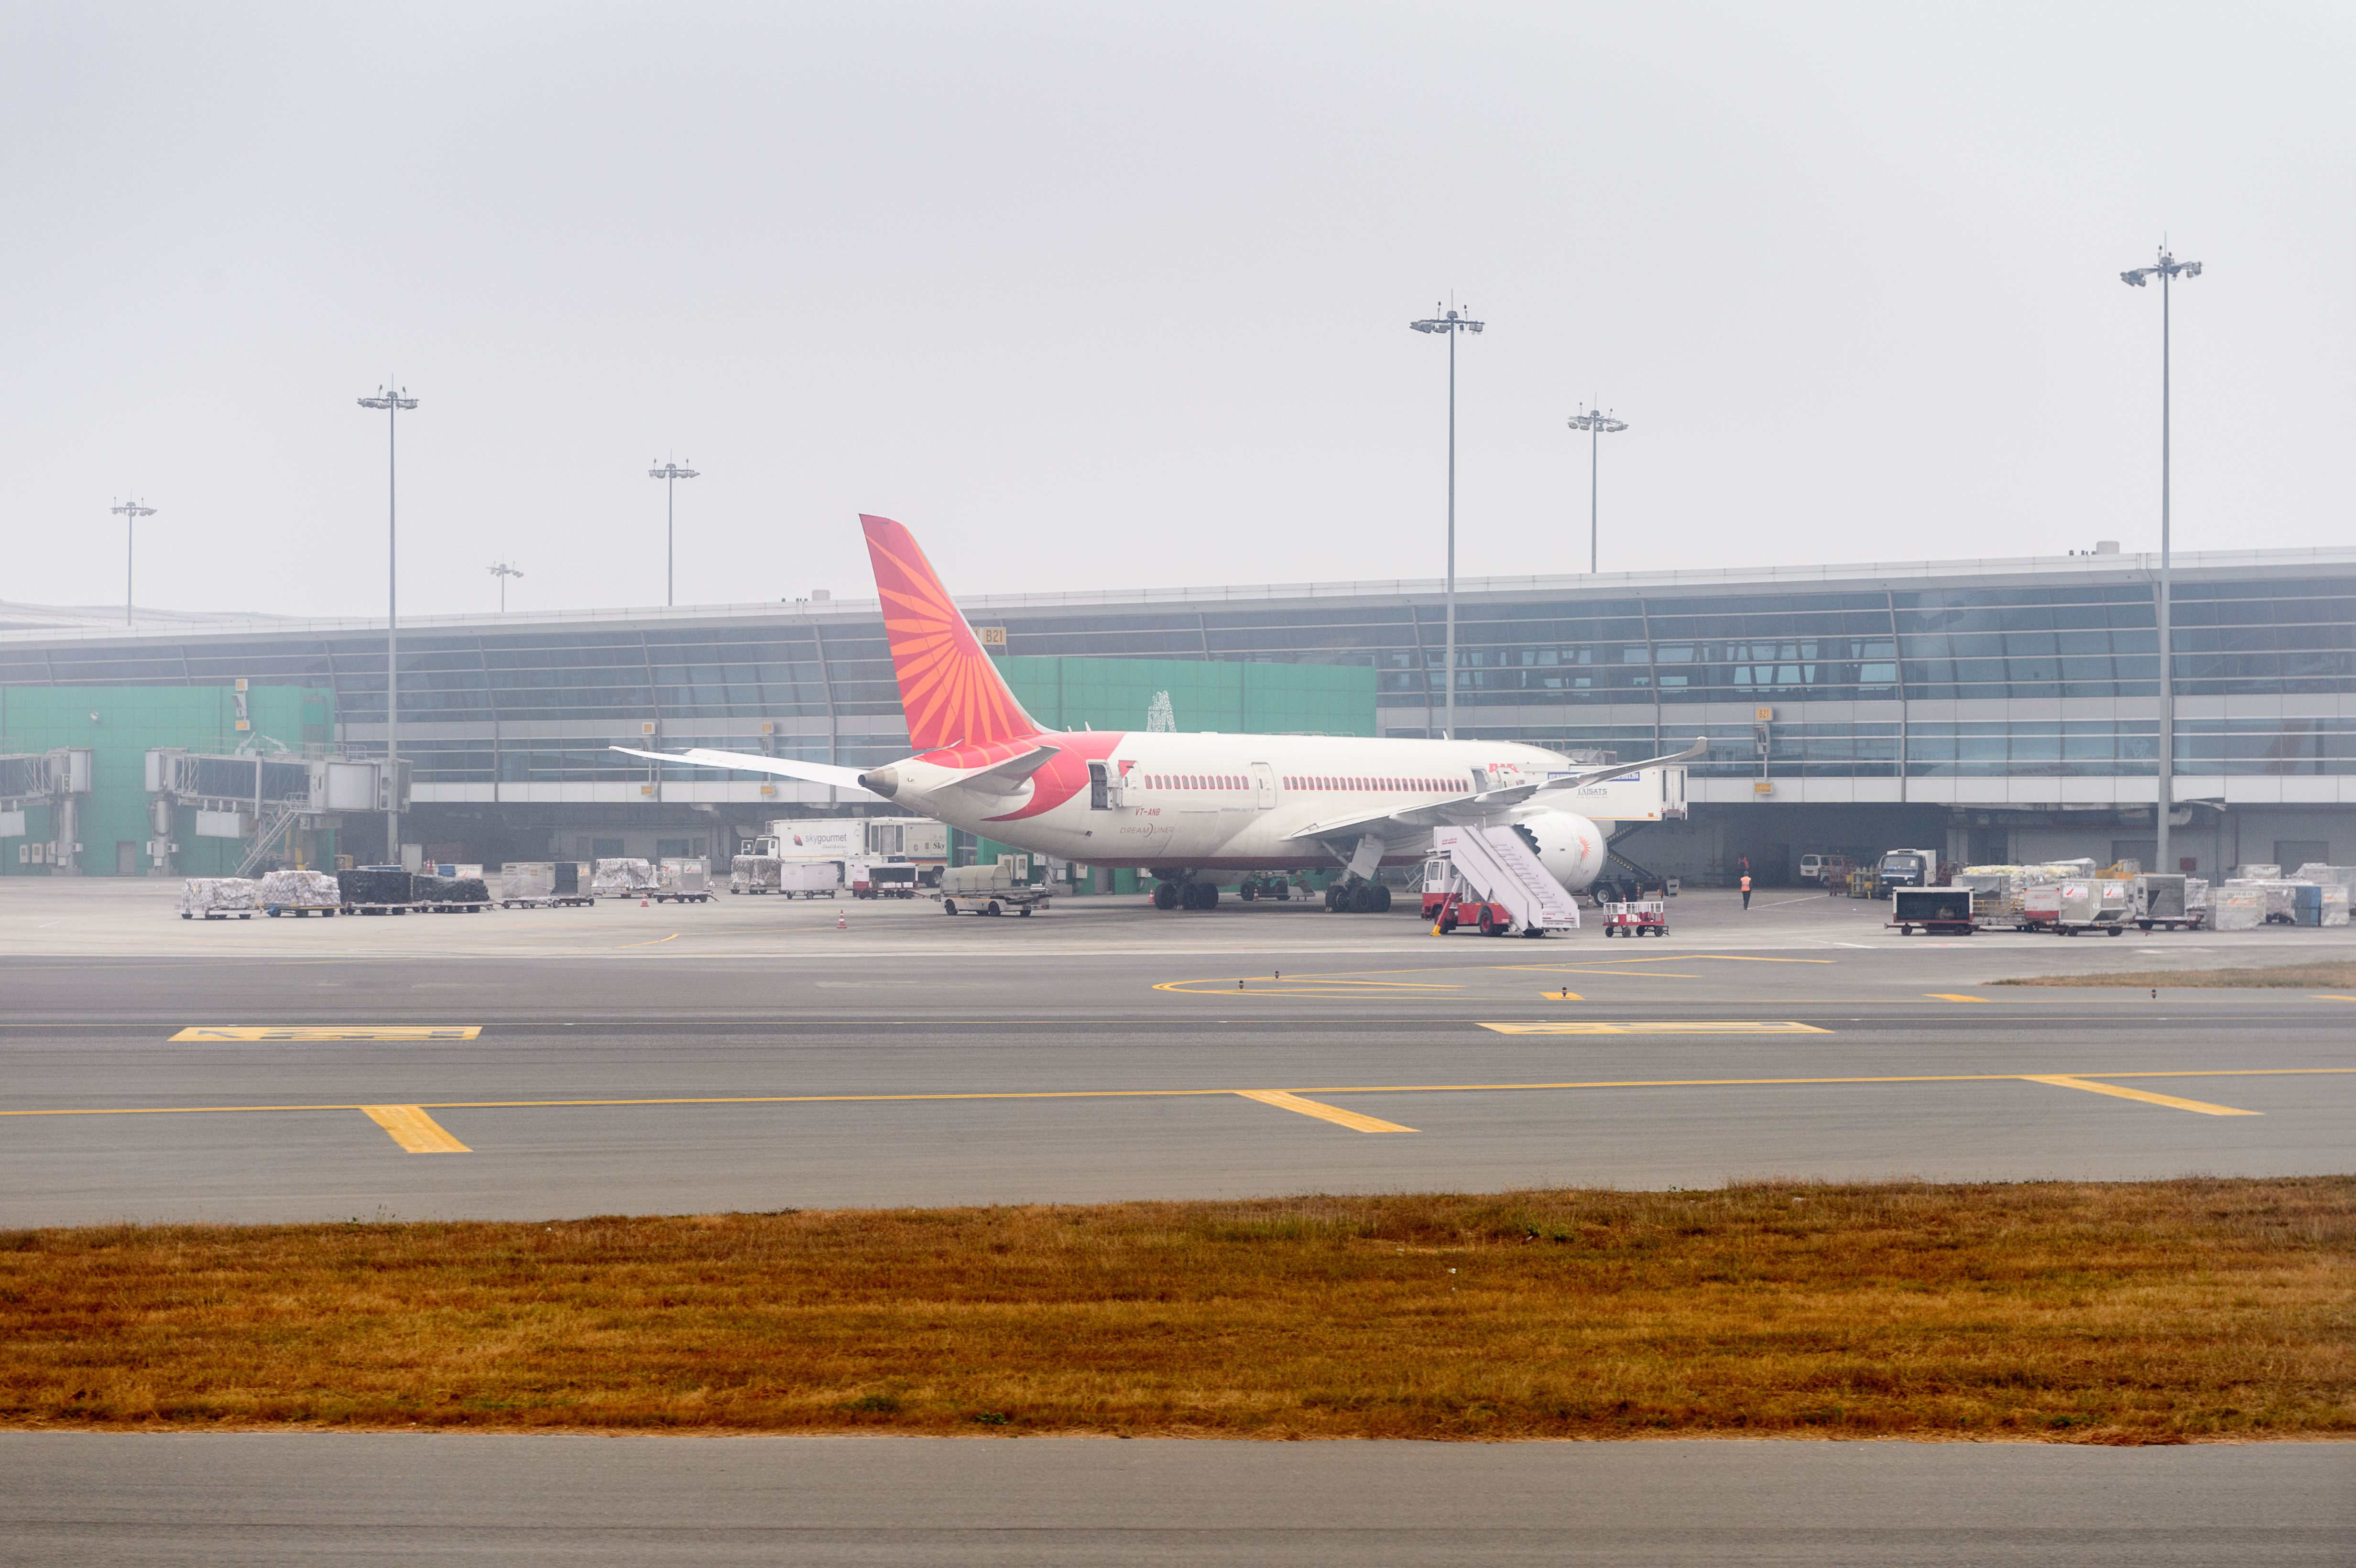 Air India Boeing 787 parked at Delhi airport